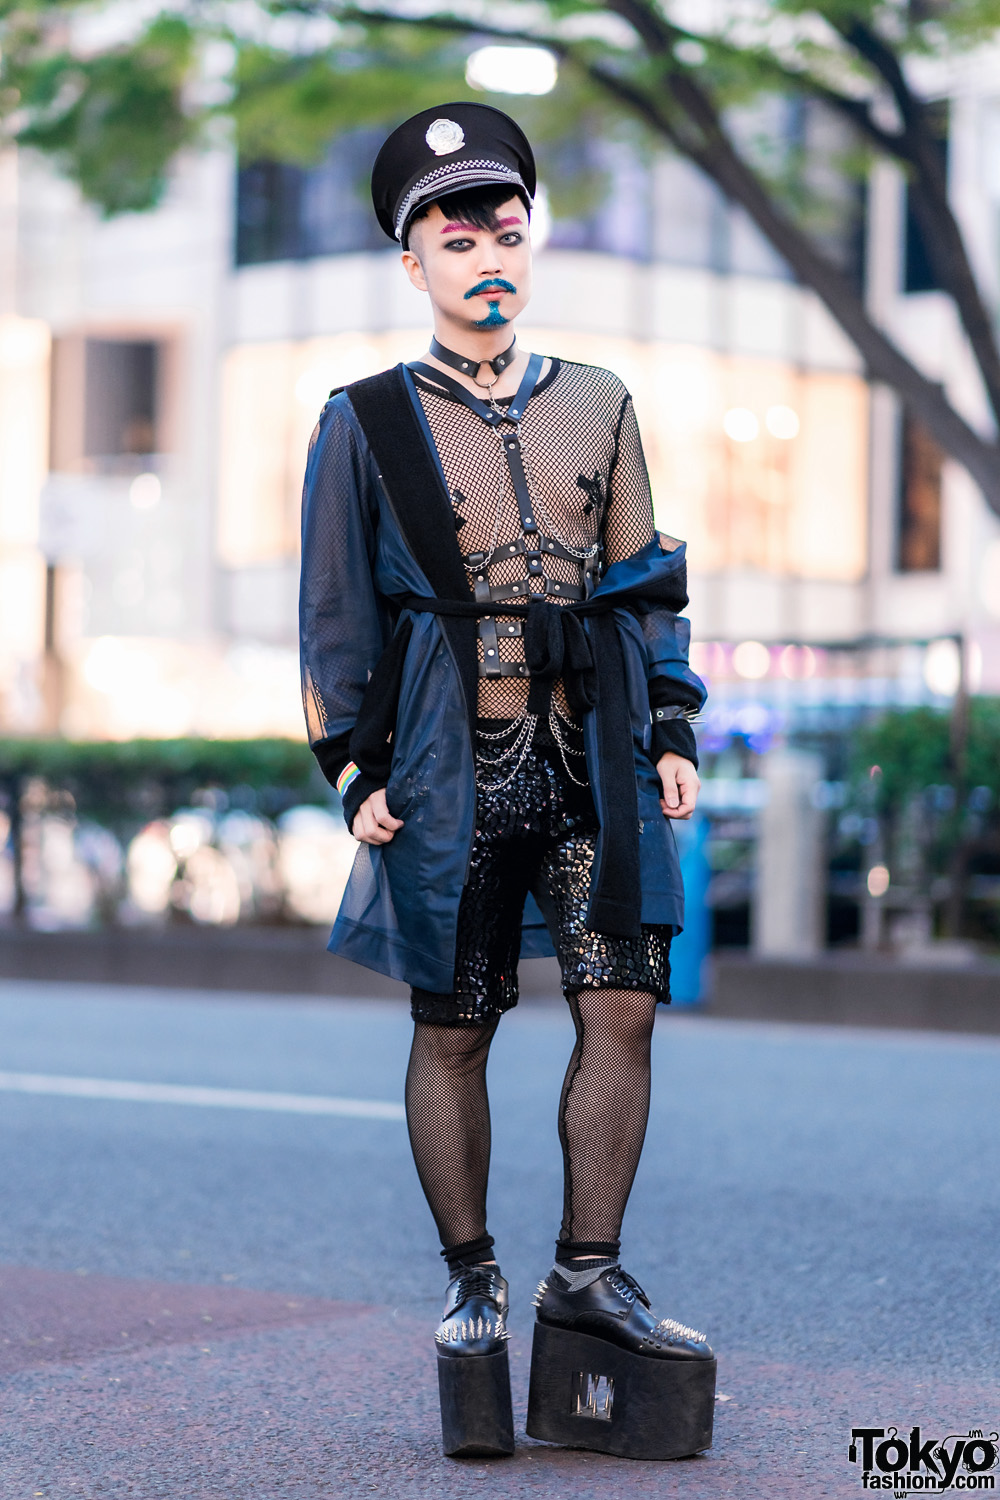 Japanese Pianist Composer in Harajuku w/ Glitter Mustache, Milkboy, Fishnets, House of Viviano Sue, Body Harness & Monster Shoes